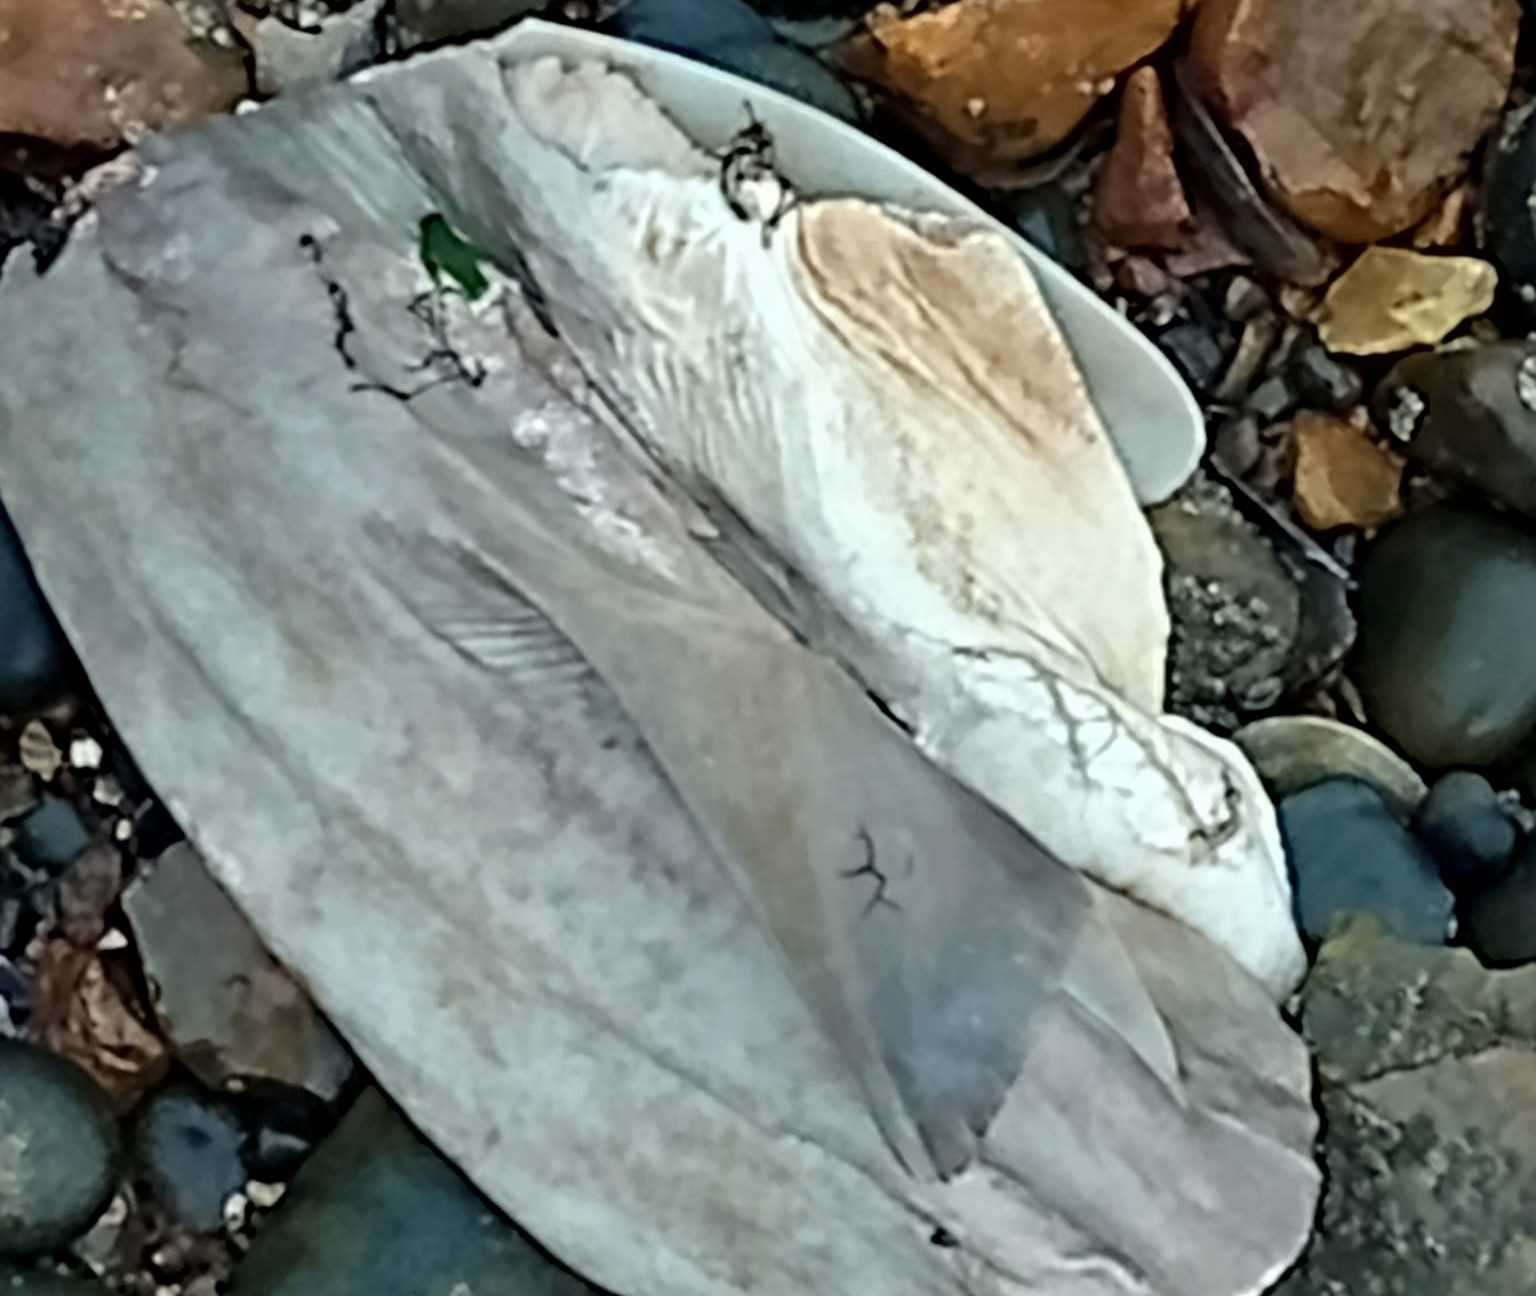 The dead fish were spotted on Wednesday, September 27